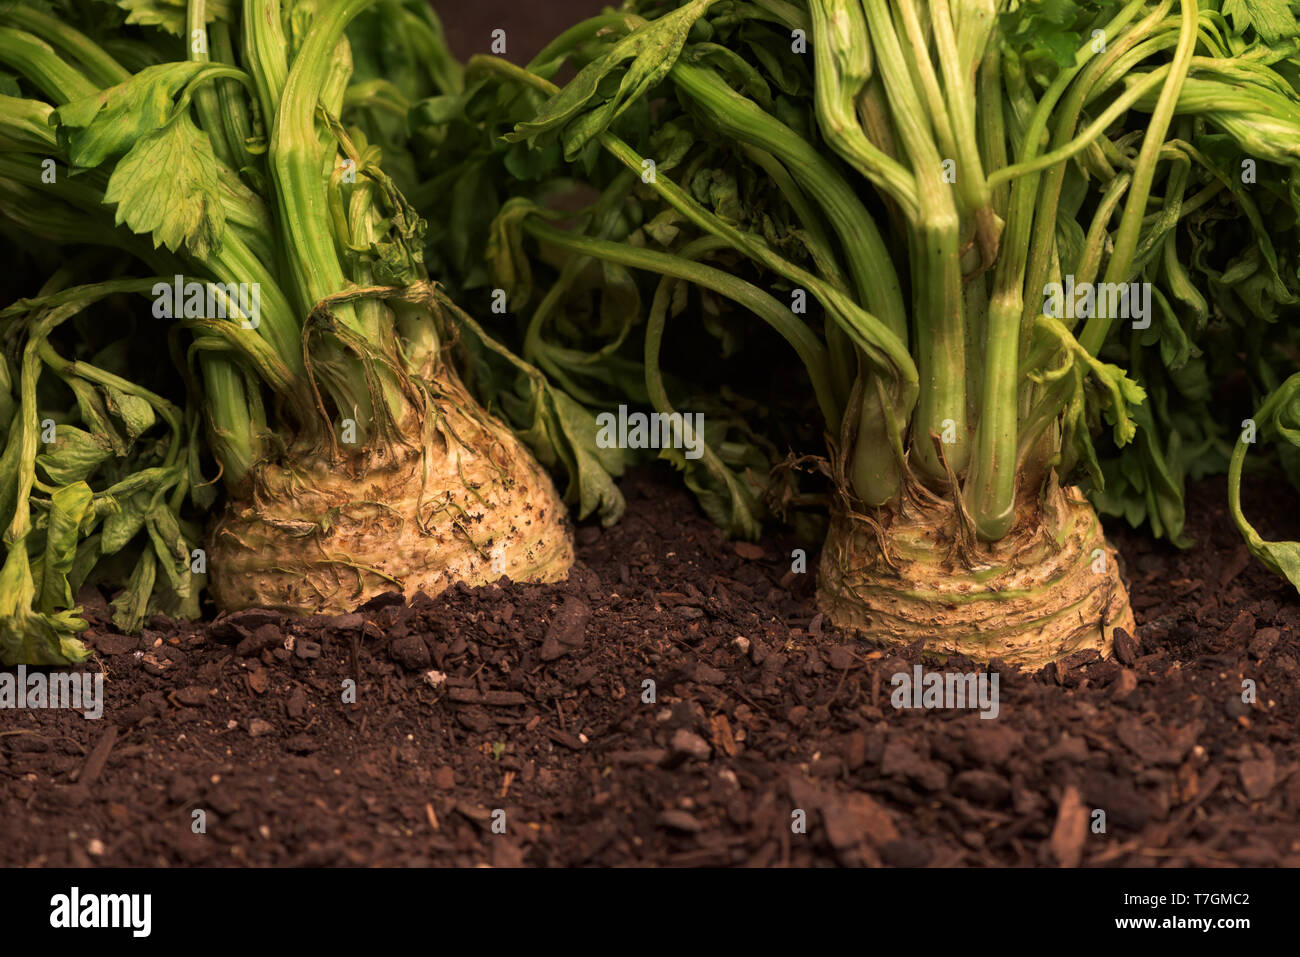 Celeriac or celery root in ground in vegetable garden, close up of turnip-rooted celery Stock Photo